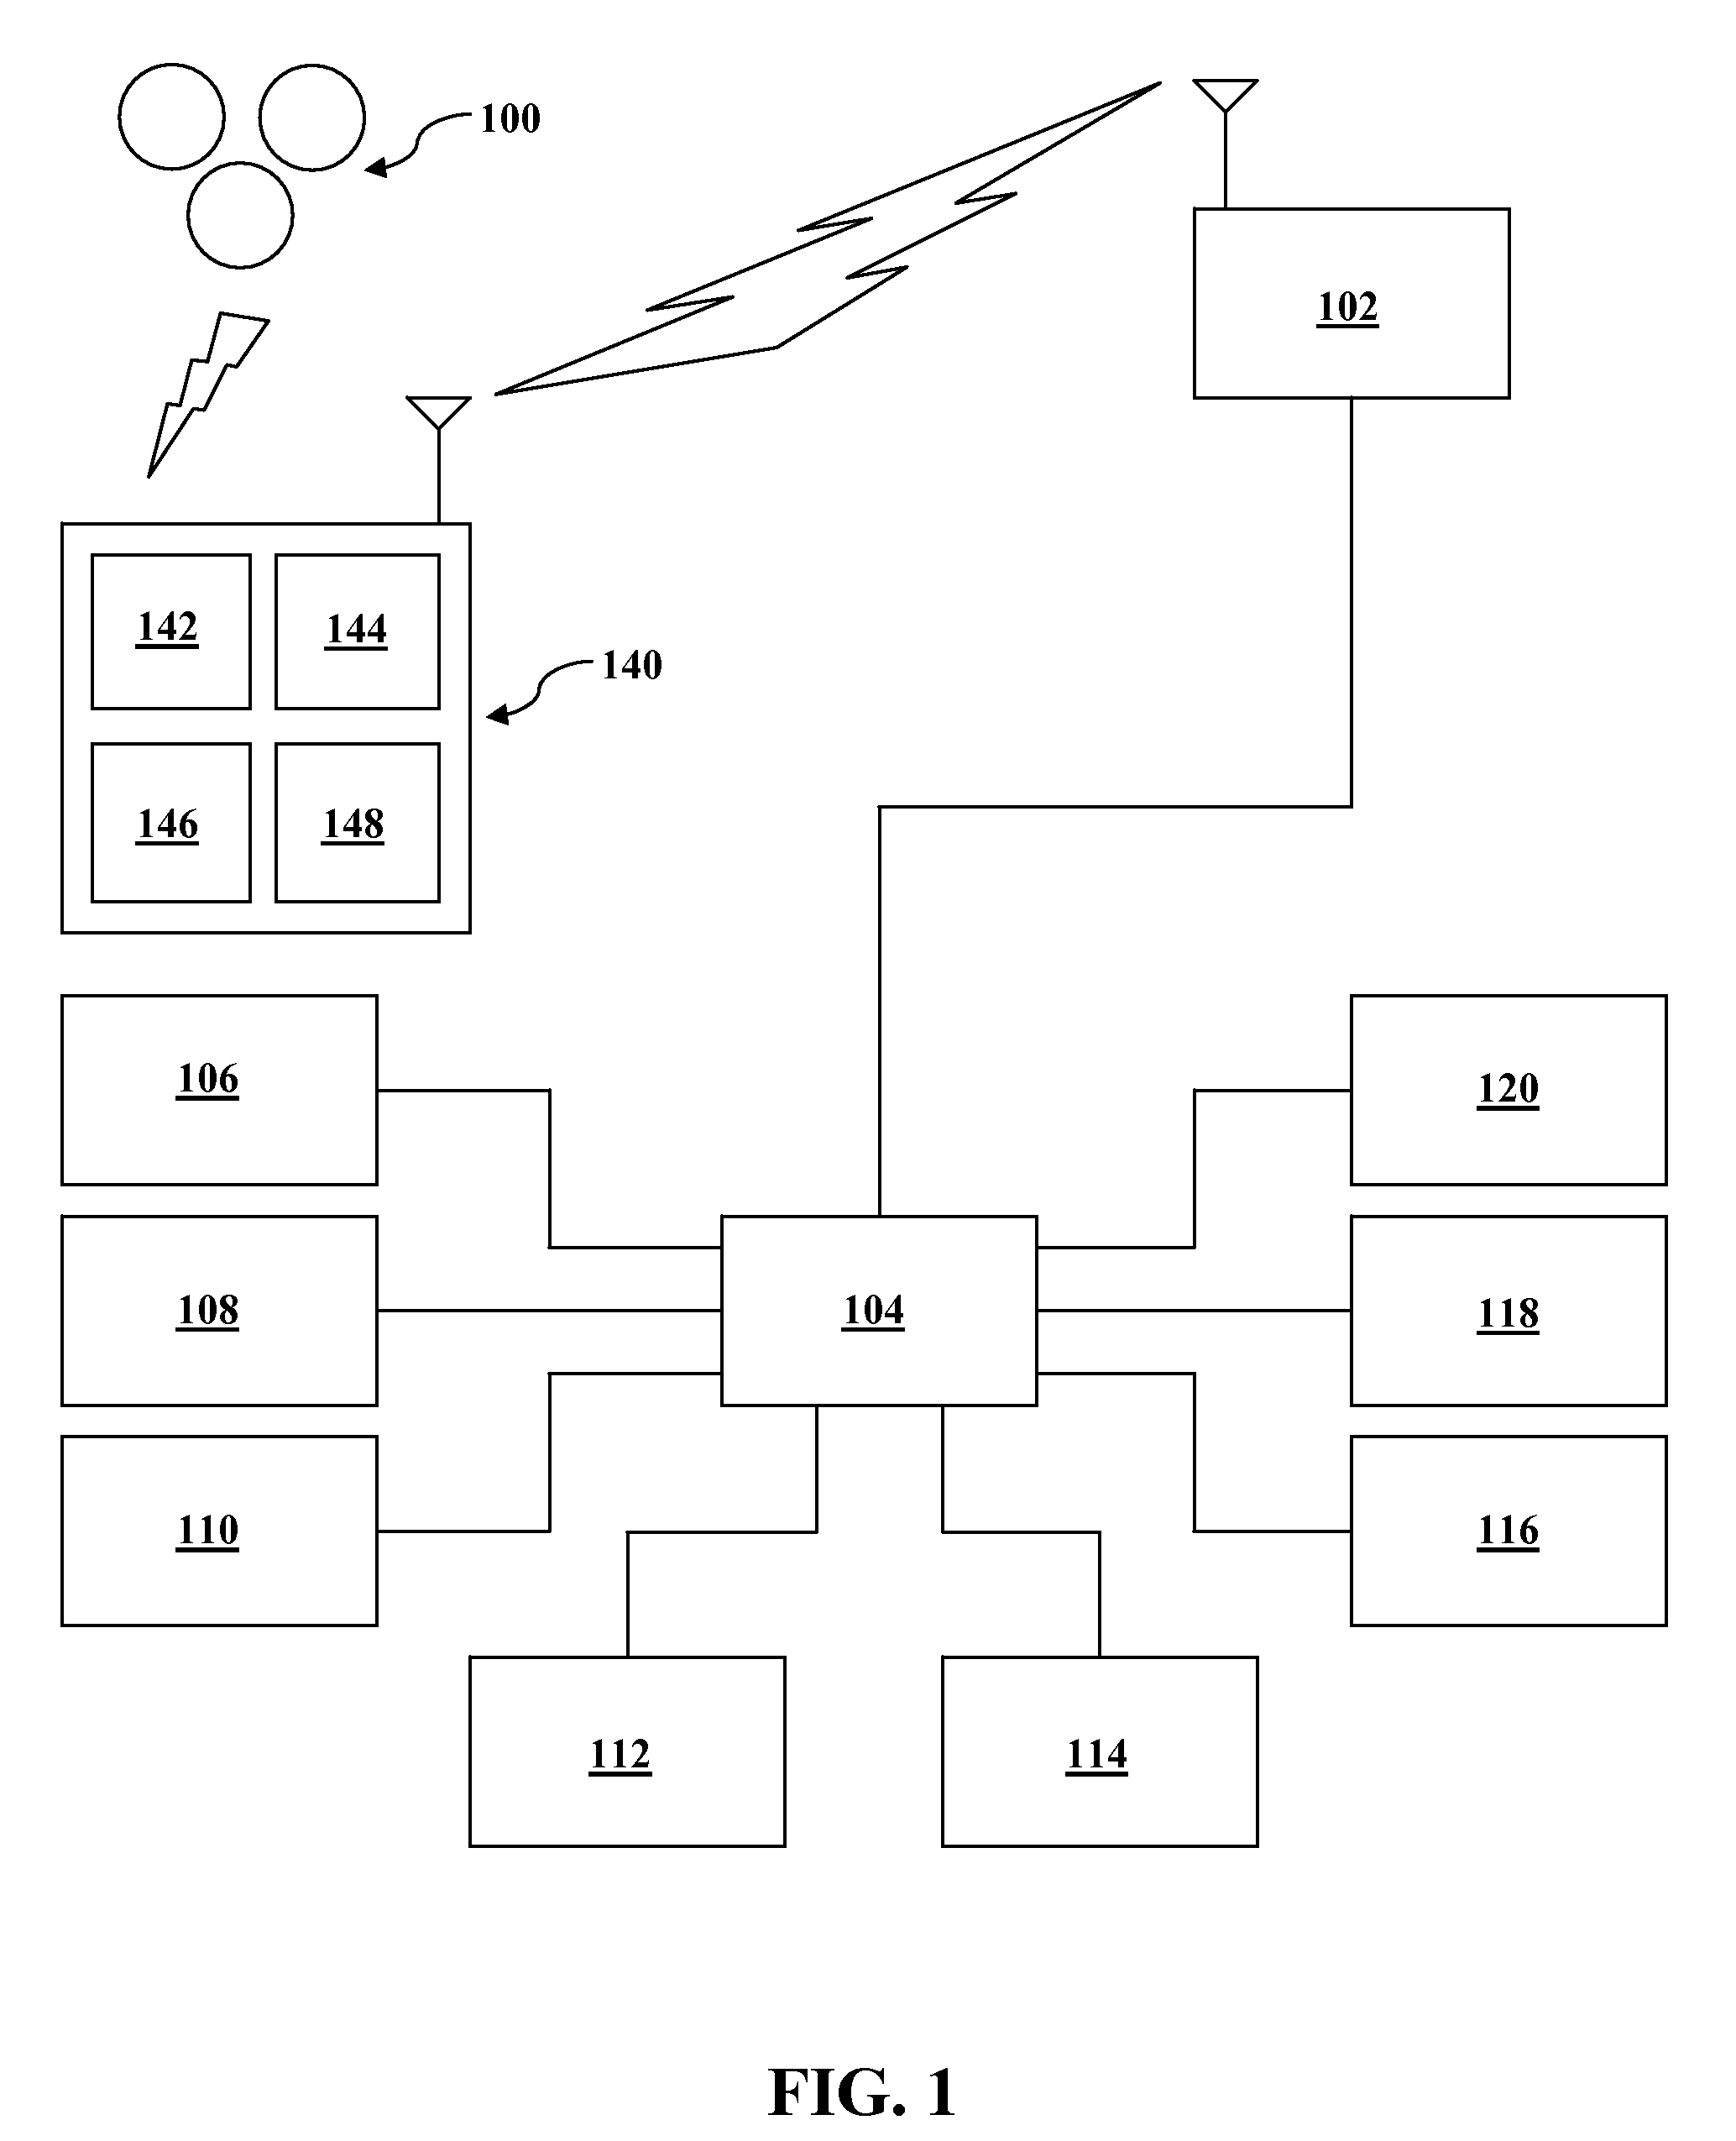 Systems and methods to determine the name of a location visited by a user of a wireless device